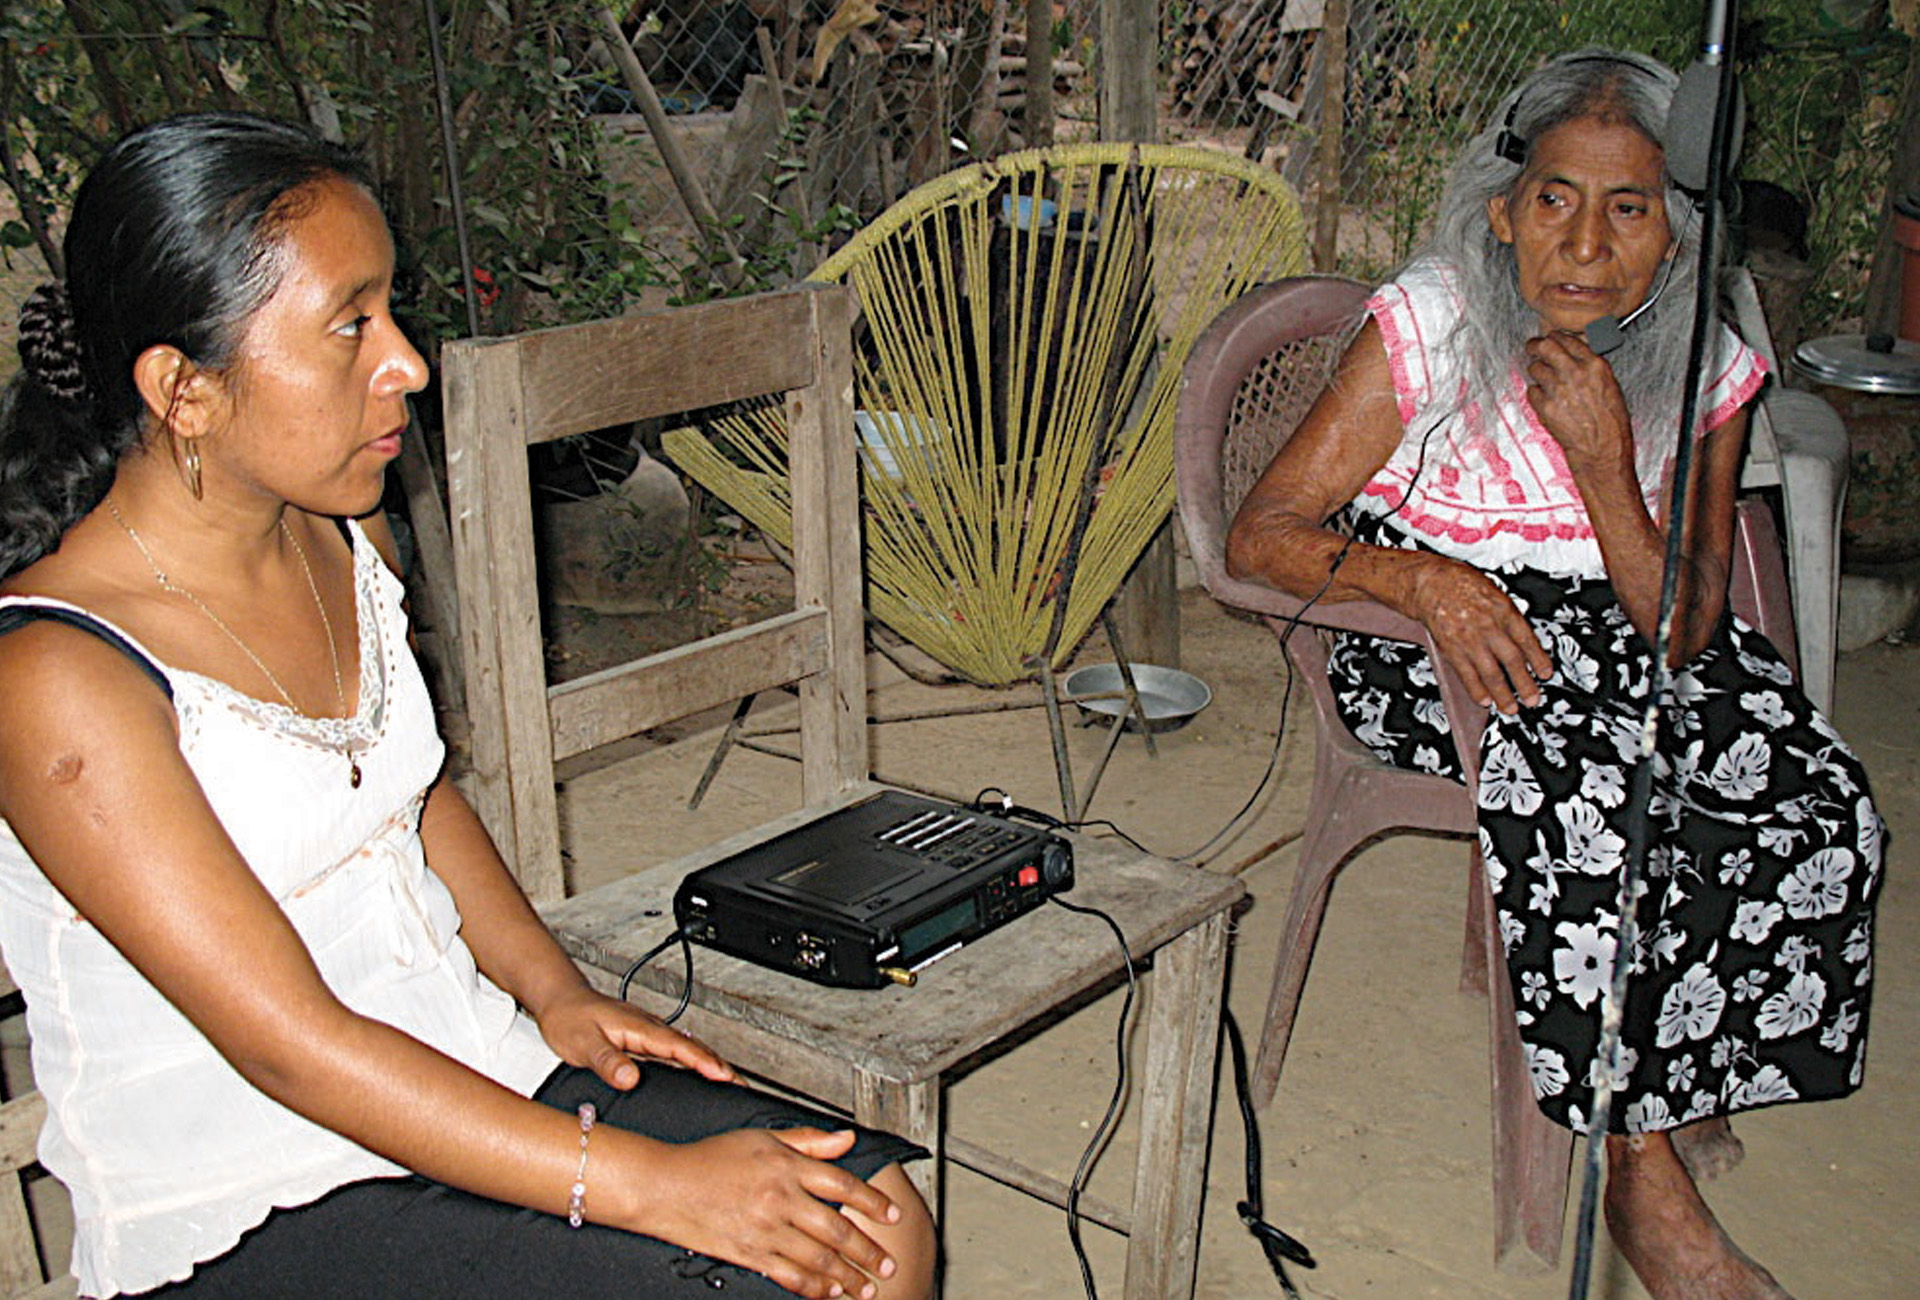 A young woman speaking to an elderly woman. The older woman speaks into a microphone recorder.